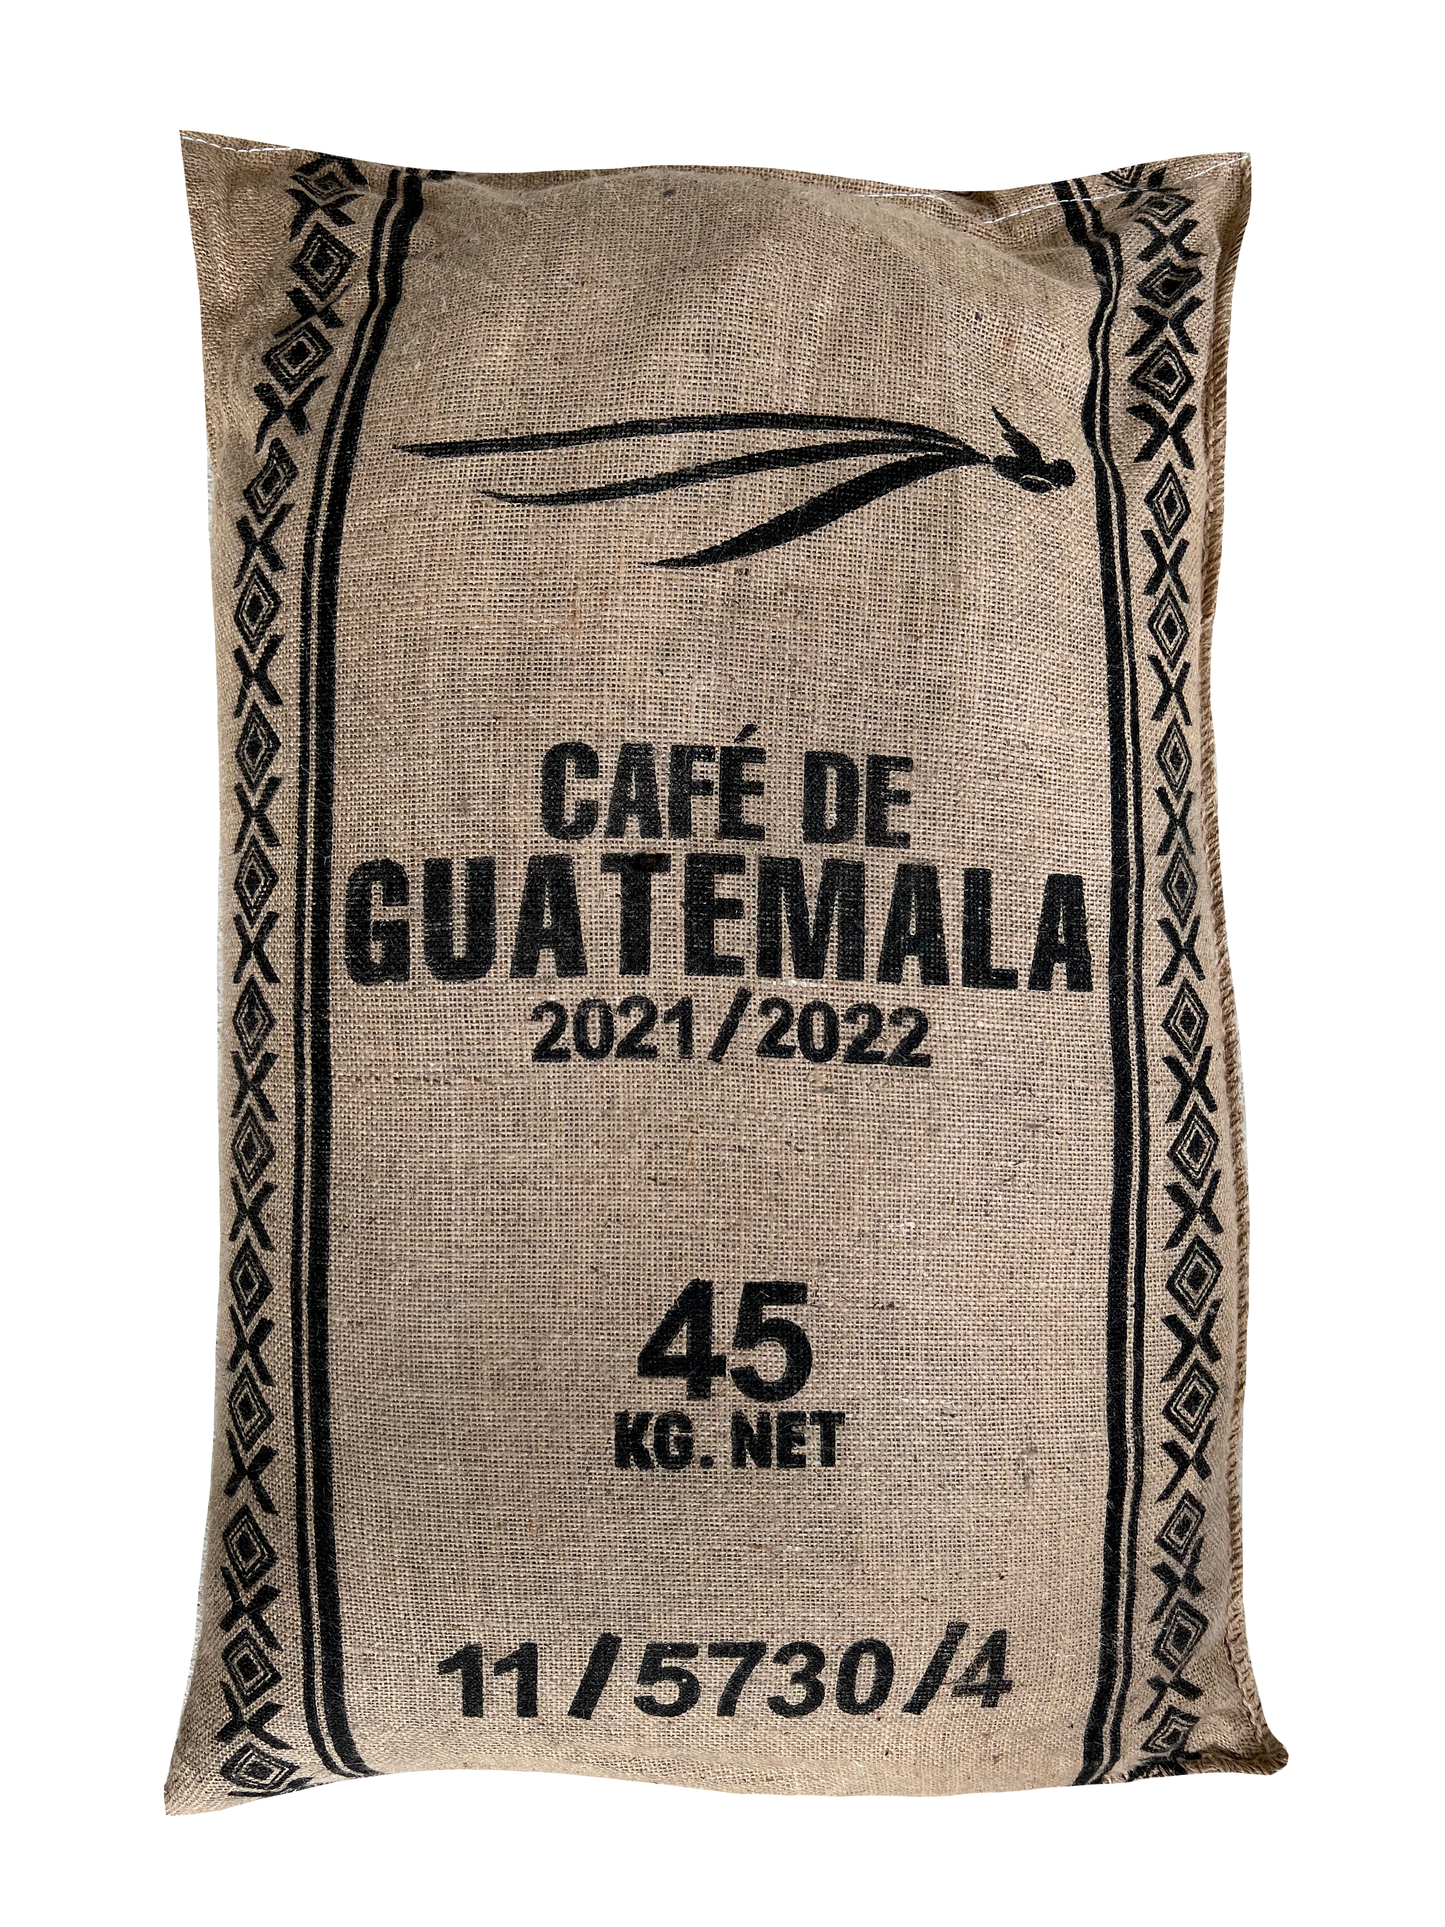 Guatemala HB Specialty Green unroasted coffee – Kafetos arabica beans